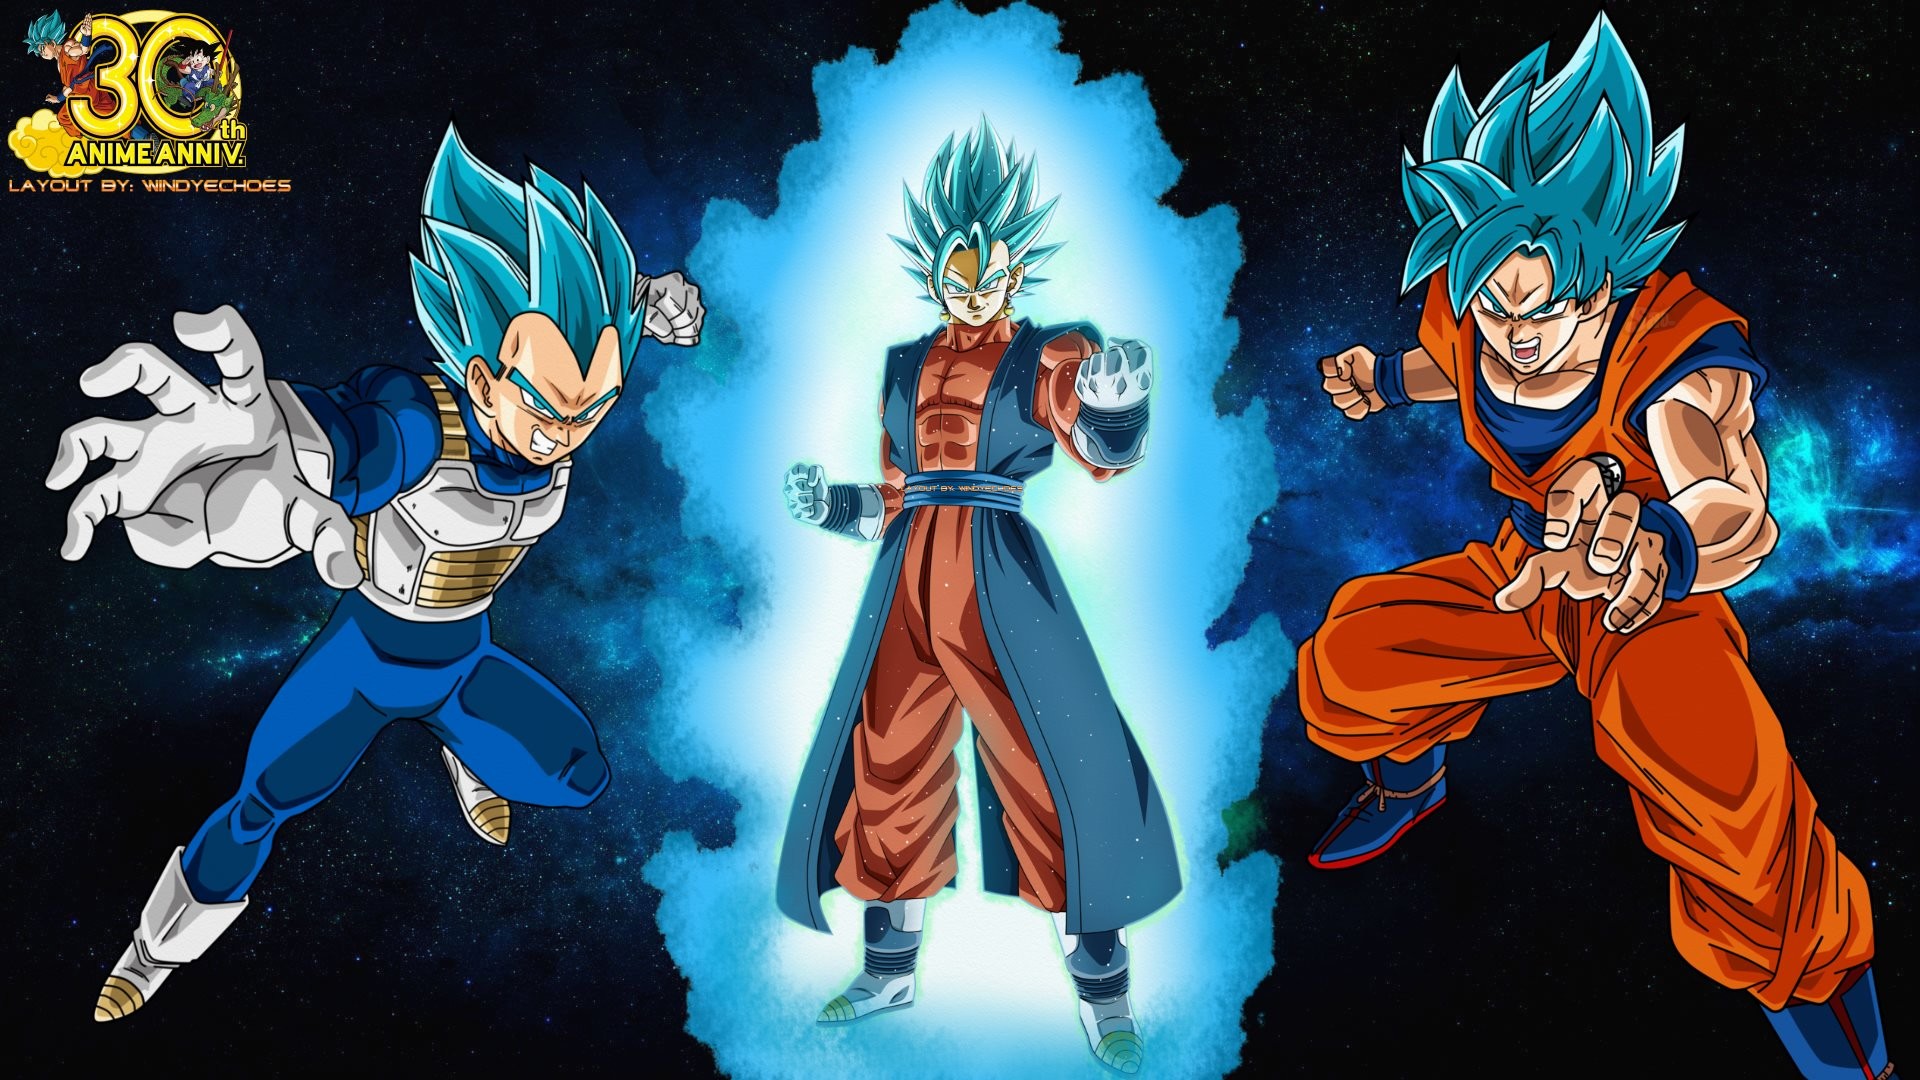 Vegito Blue Fusion Wallpaper by WindyEchoes Vegito Blue Fusion Wallpaper by WindyEchoes